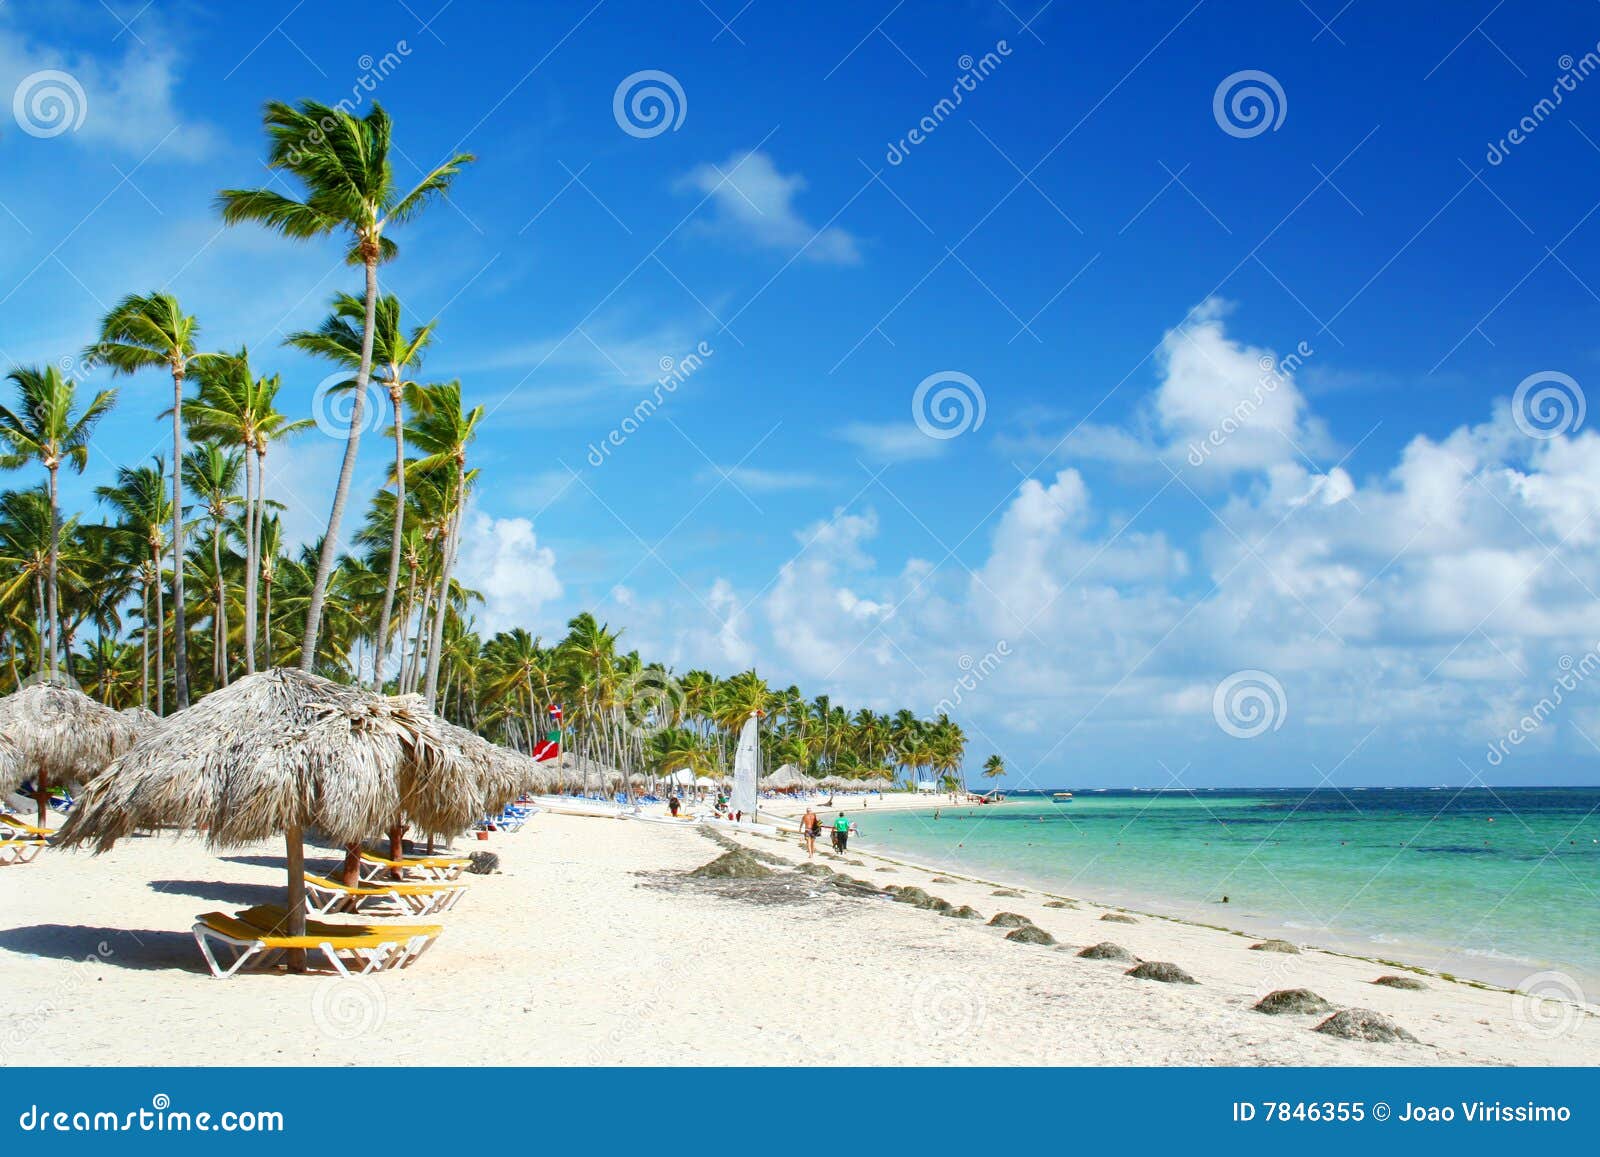 caribbean resort beach with umbrellas and chairs